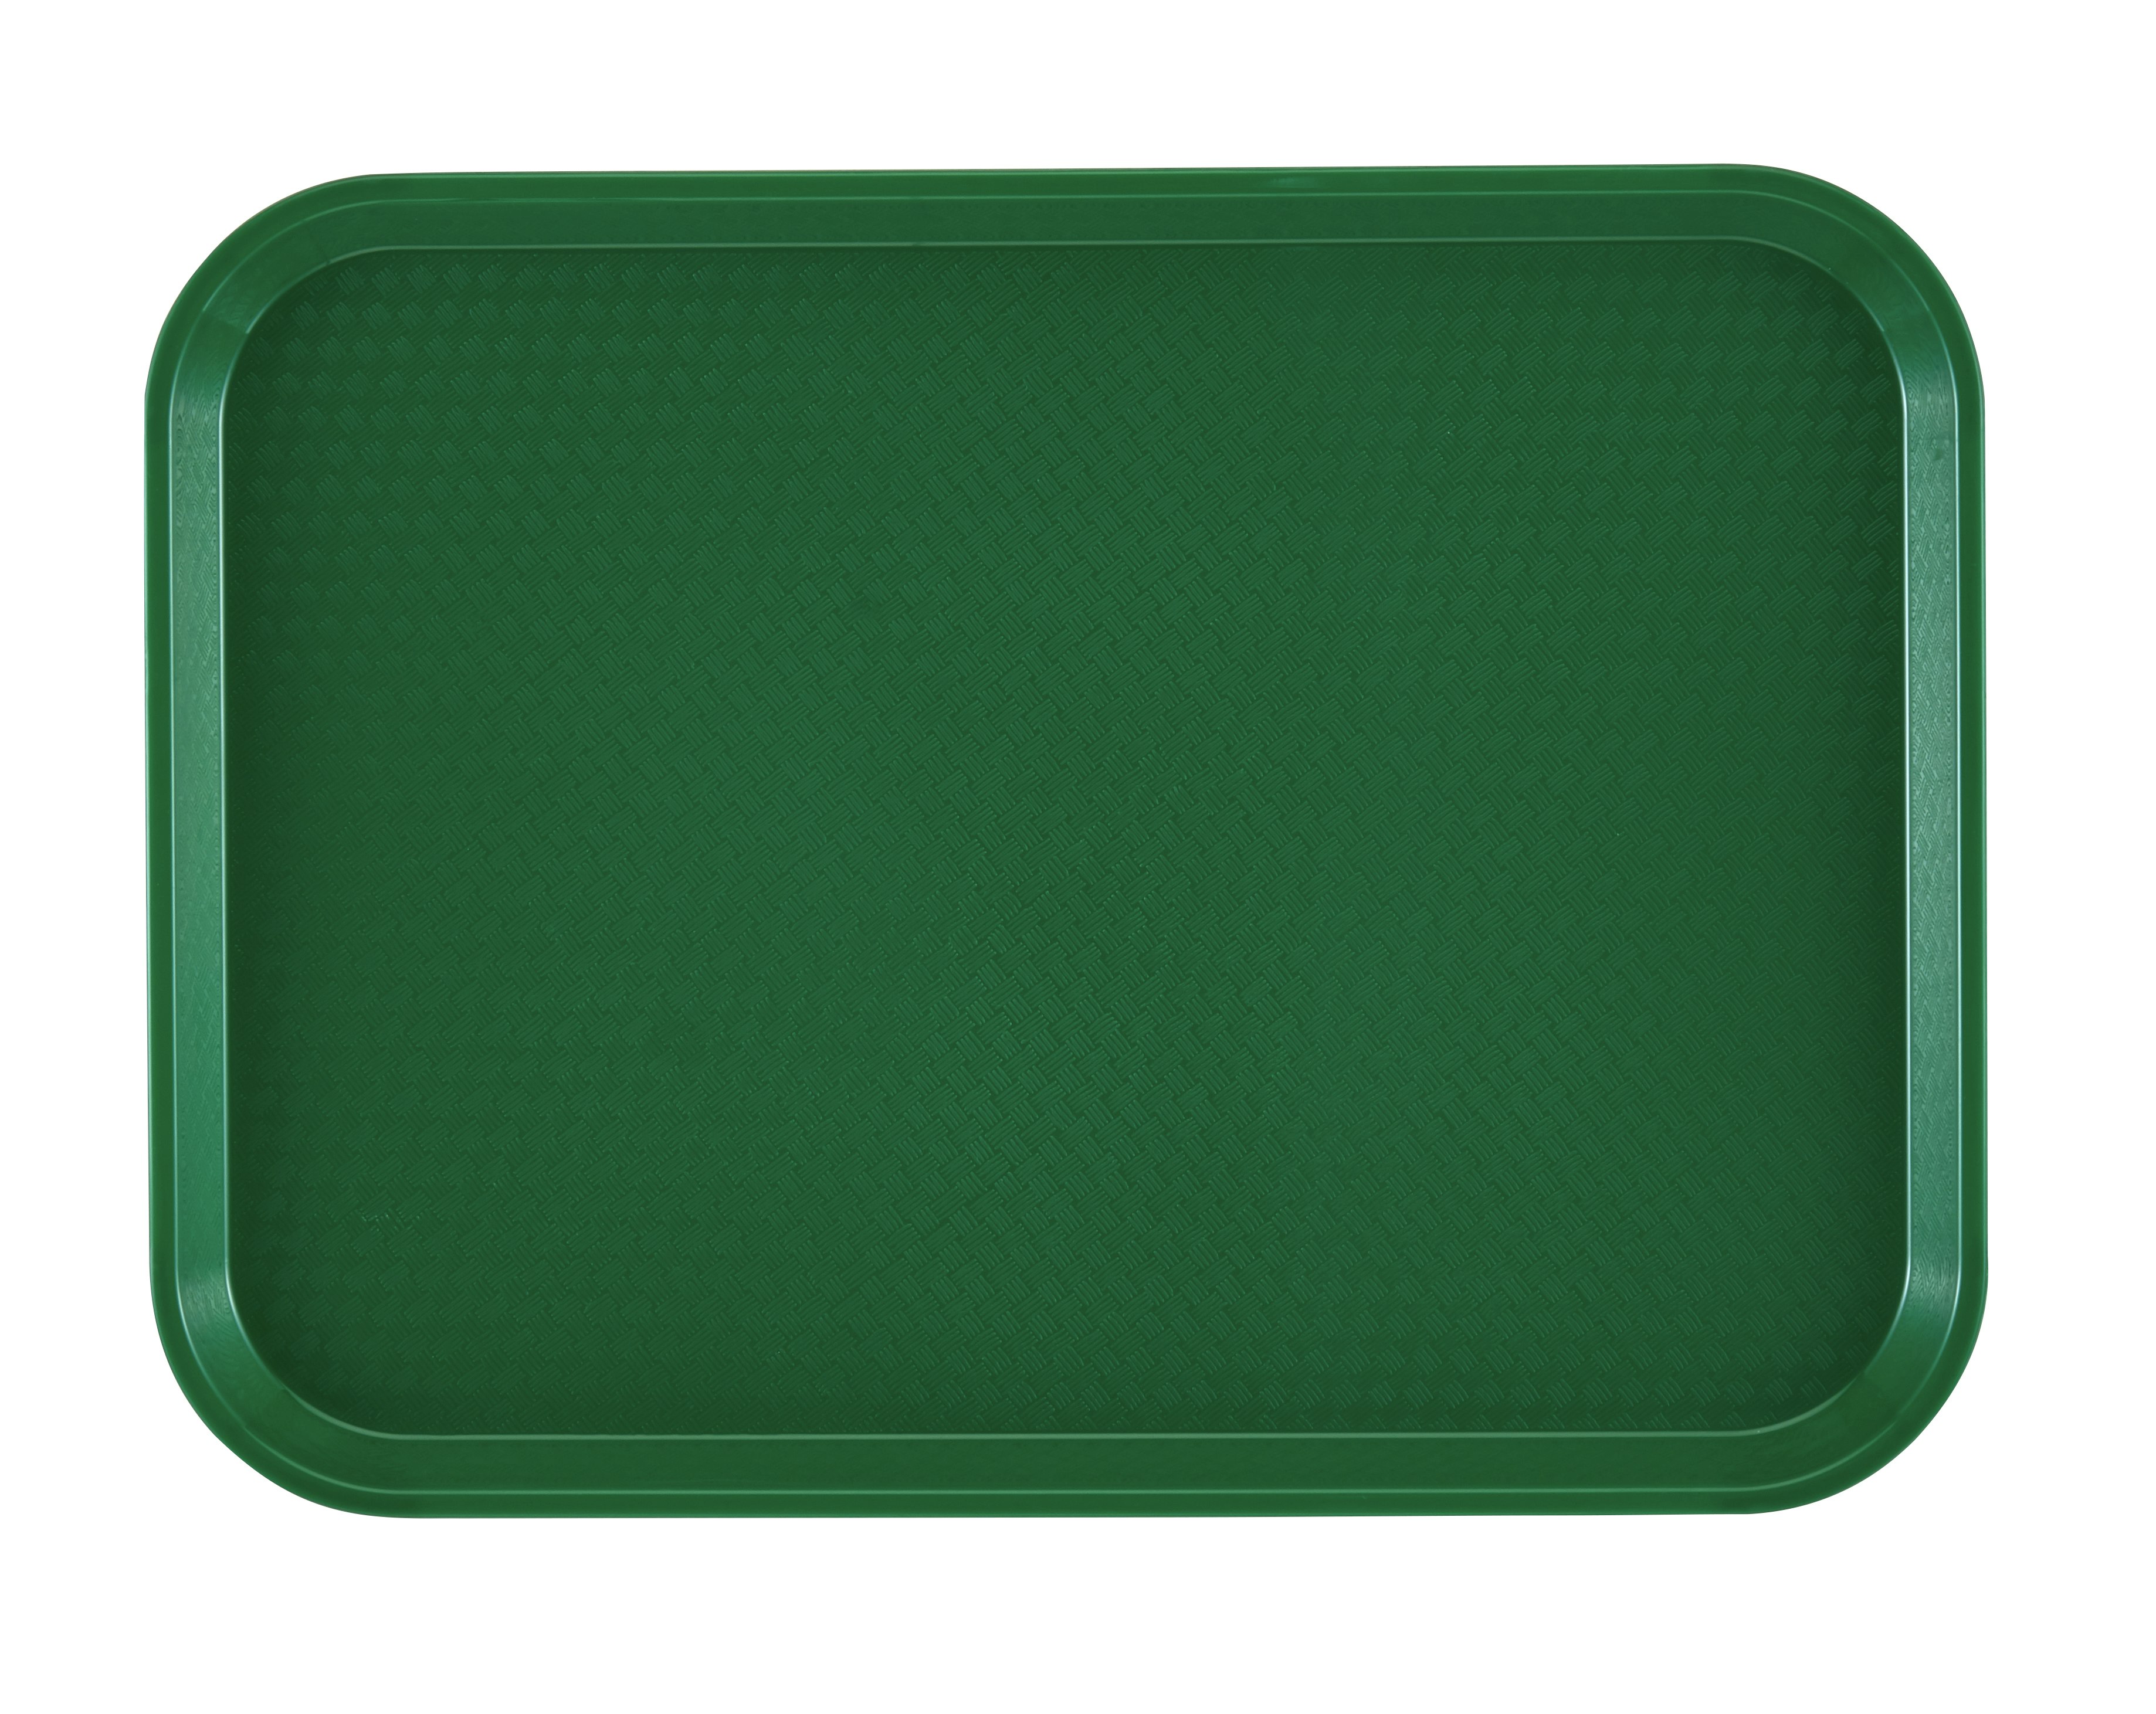 Cambro Fast Food Tray in Green Polypropylene with Heat Resistance 410 mm 